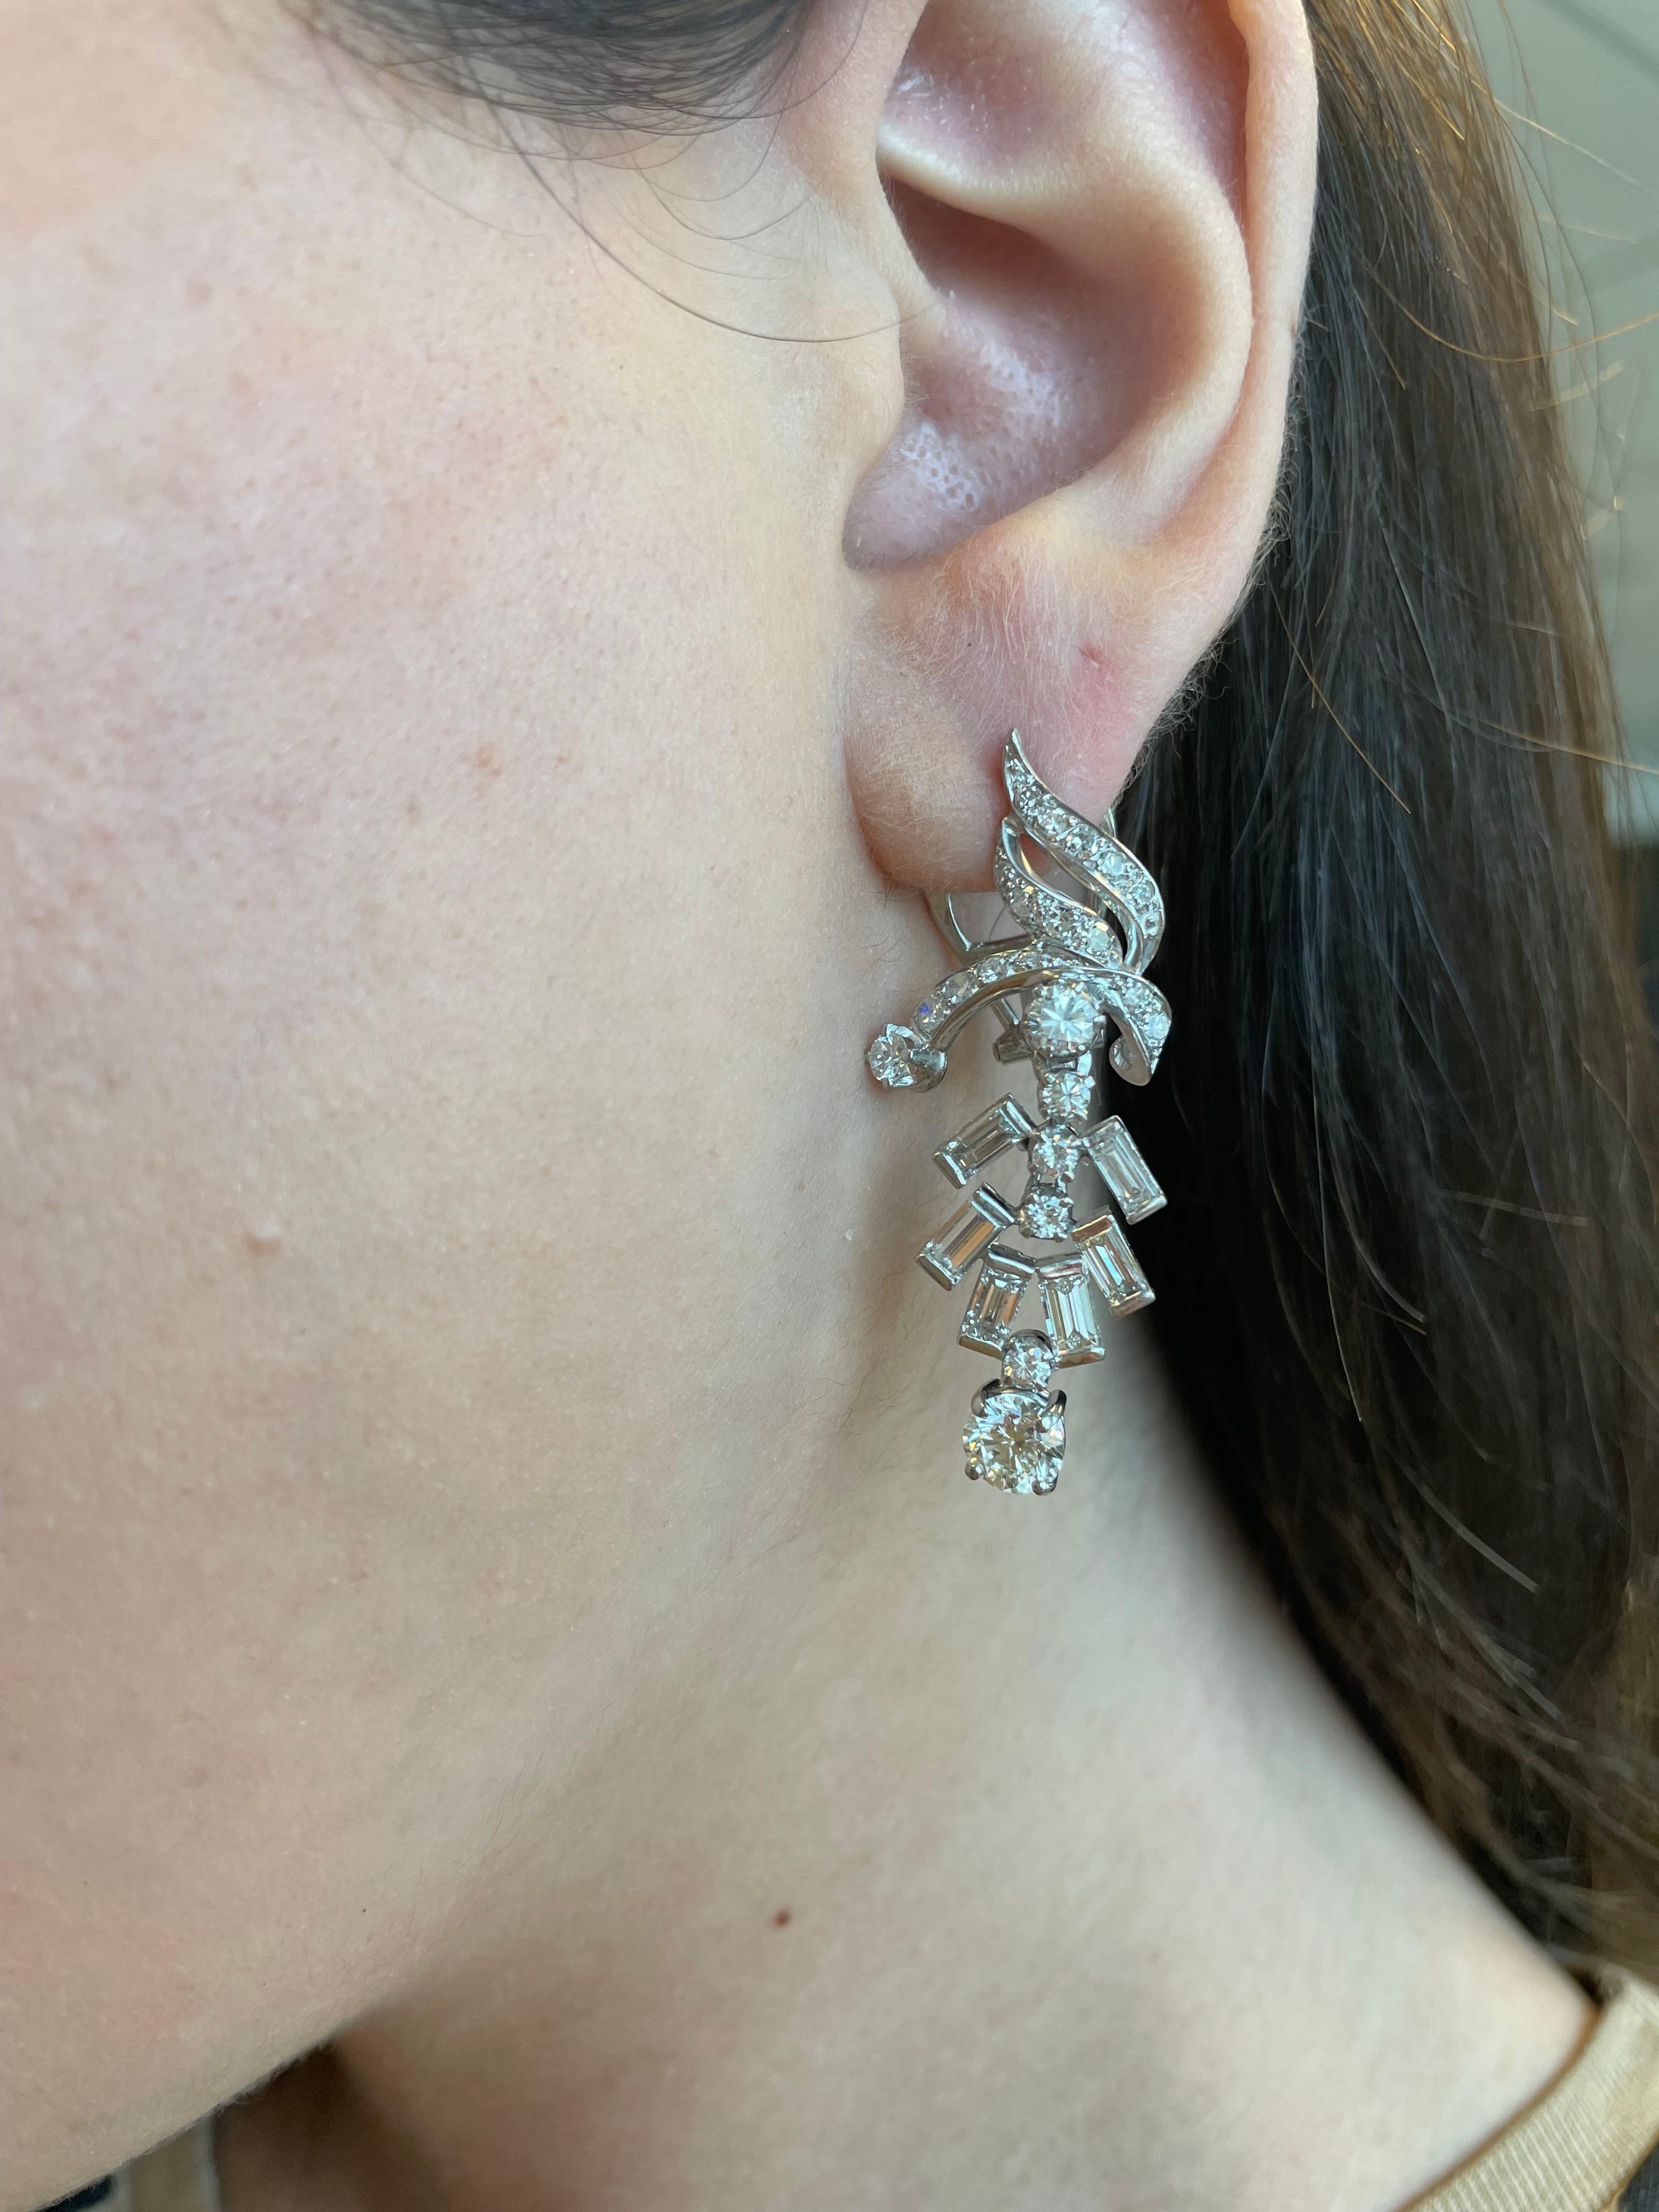 Stunning Edwardian inspired chandelier earrings.
2 center round brilliant diamonds, 1.40ct EGL certified. One stone H color grade and the other I color grade, both VVS2 clarity grade. Complimented by 4.00ct of round brilliant and baguette cut